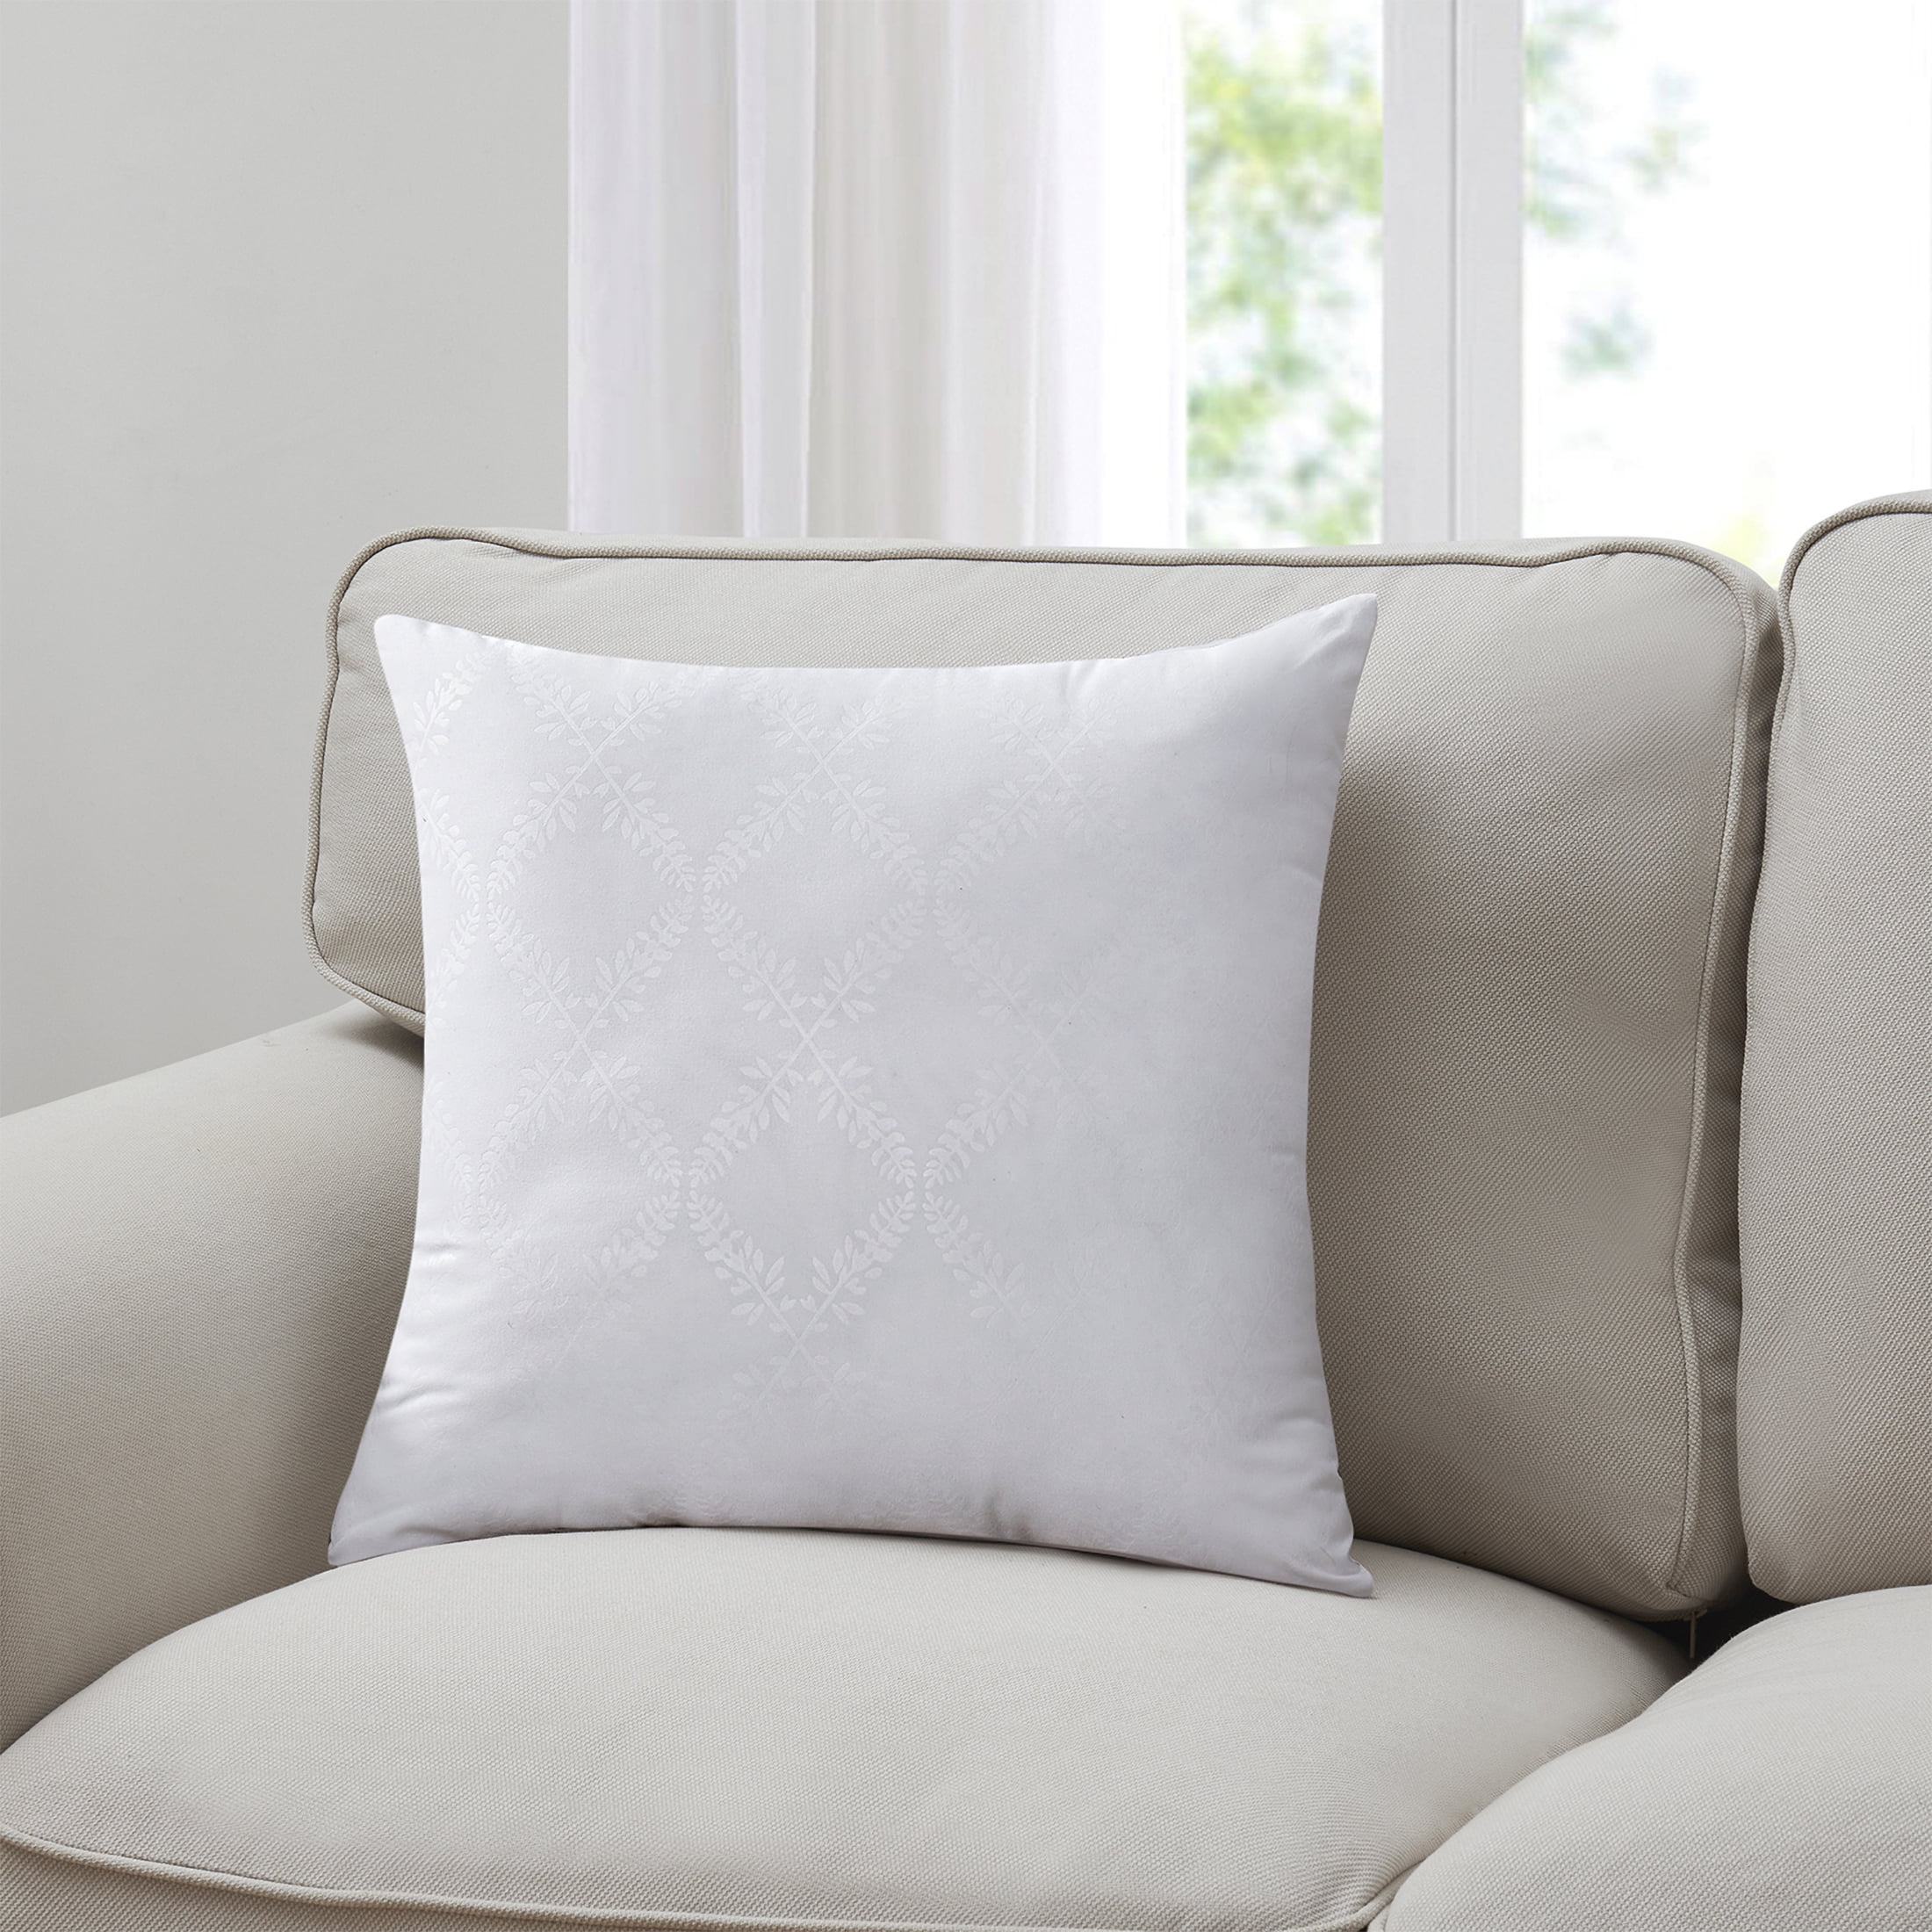 The Best Throw Pillow Inserts That Never Need to be Re-Poofed! — House Full  of Summer - Coastal Home & Lifestyle